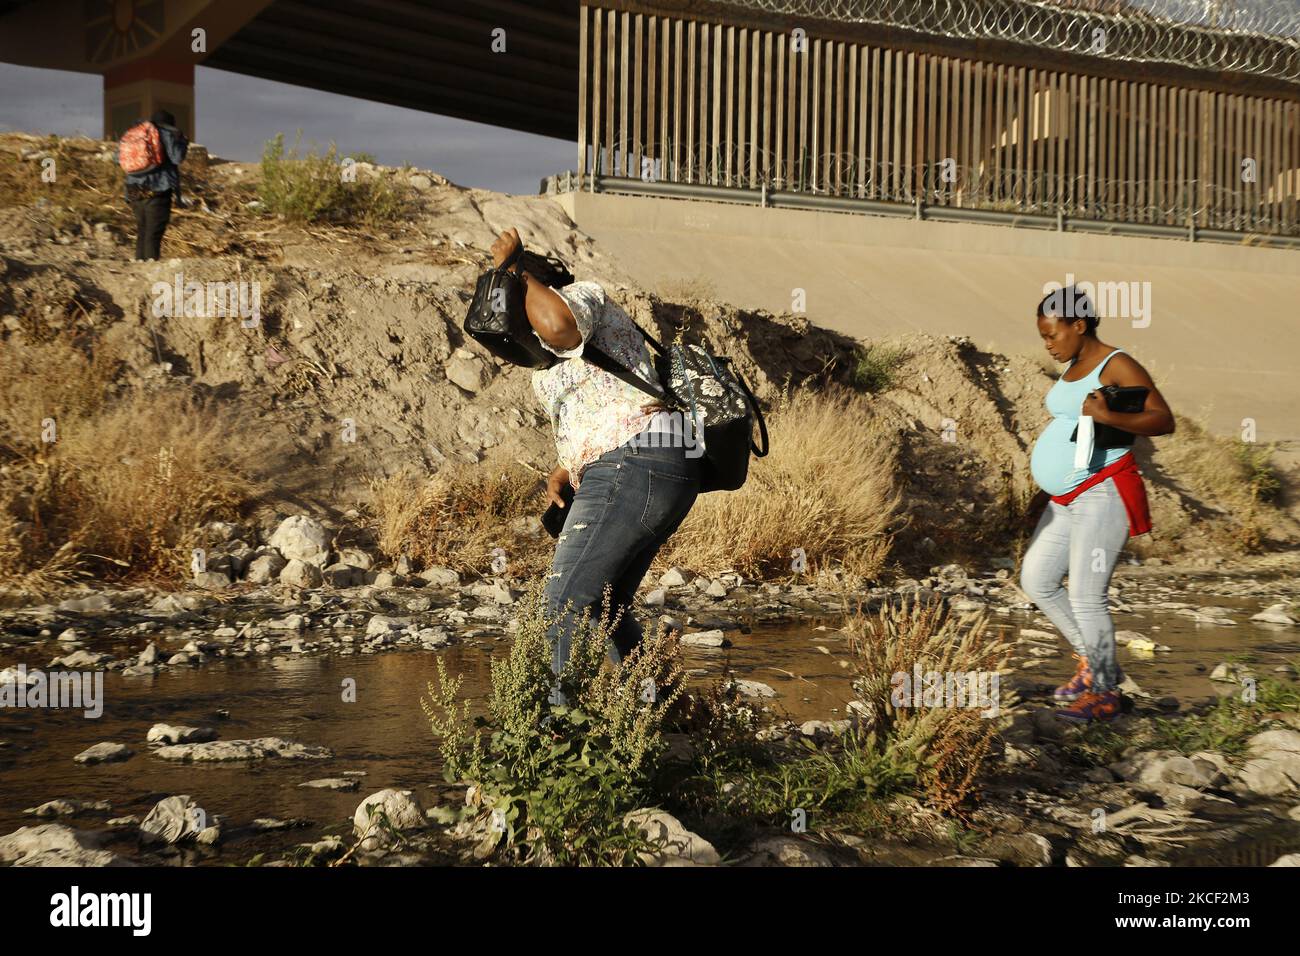 Migrants cross Rio Bravo from Mexico to the US on May 21, 2021 in Ciudad Juarez Mexico.According to unofficial estimates approximately 200,000 migrants have crossed into the United States along the southern border since February 2021. (Photo by John Lamparski/NurPhoto) Stock Photo